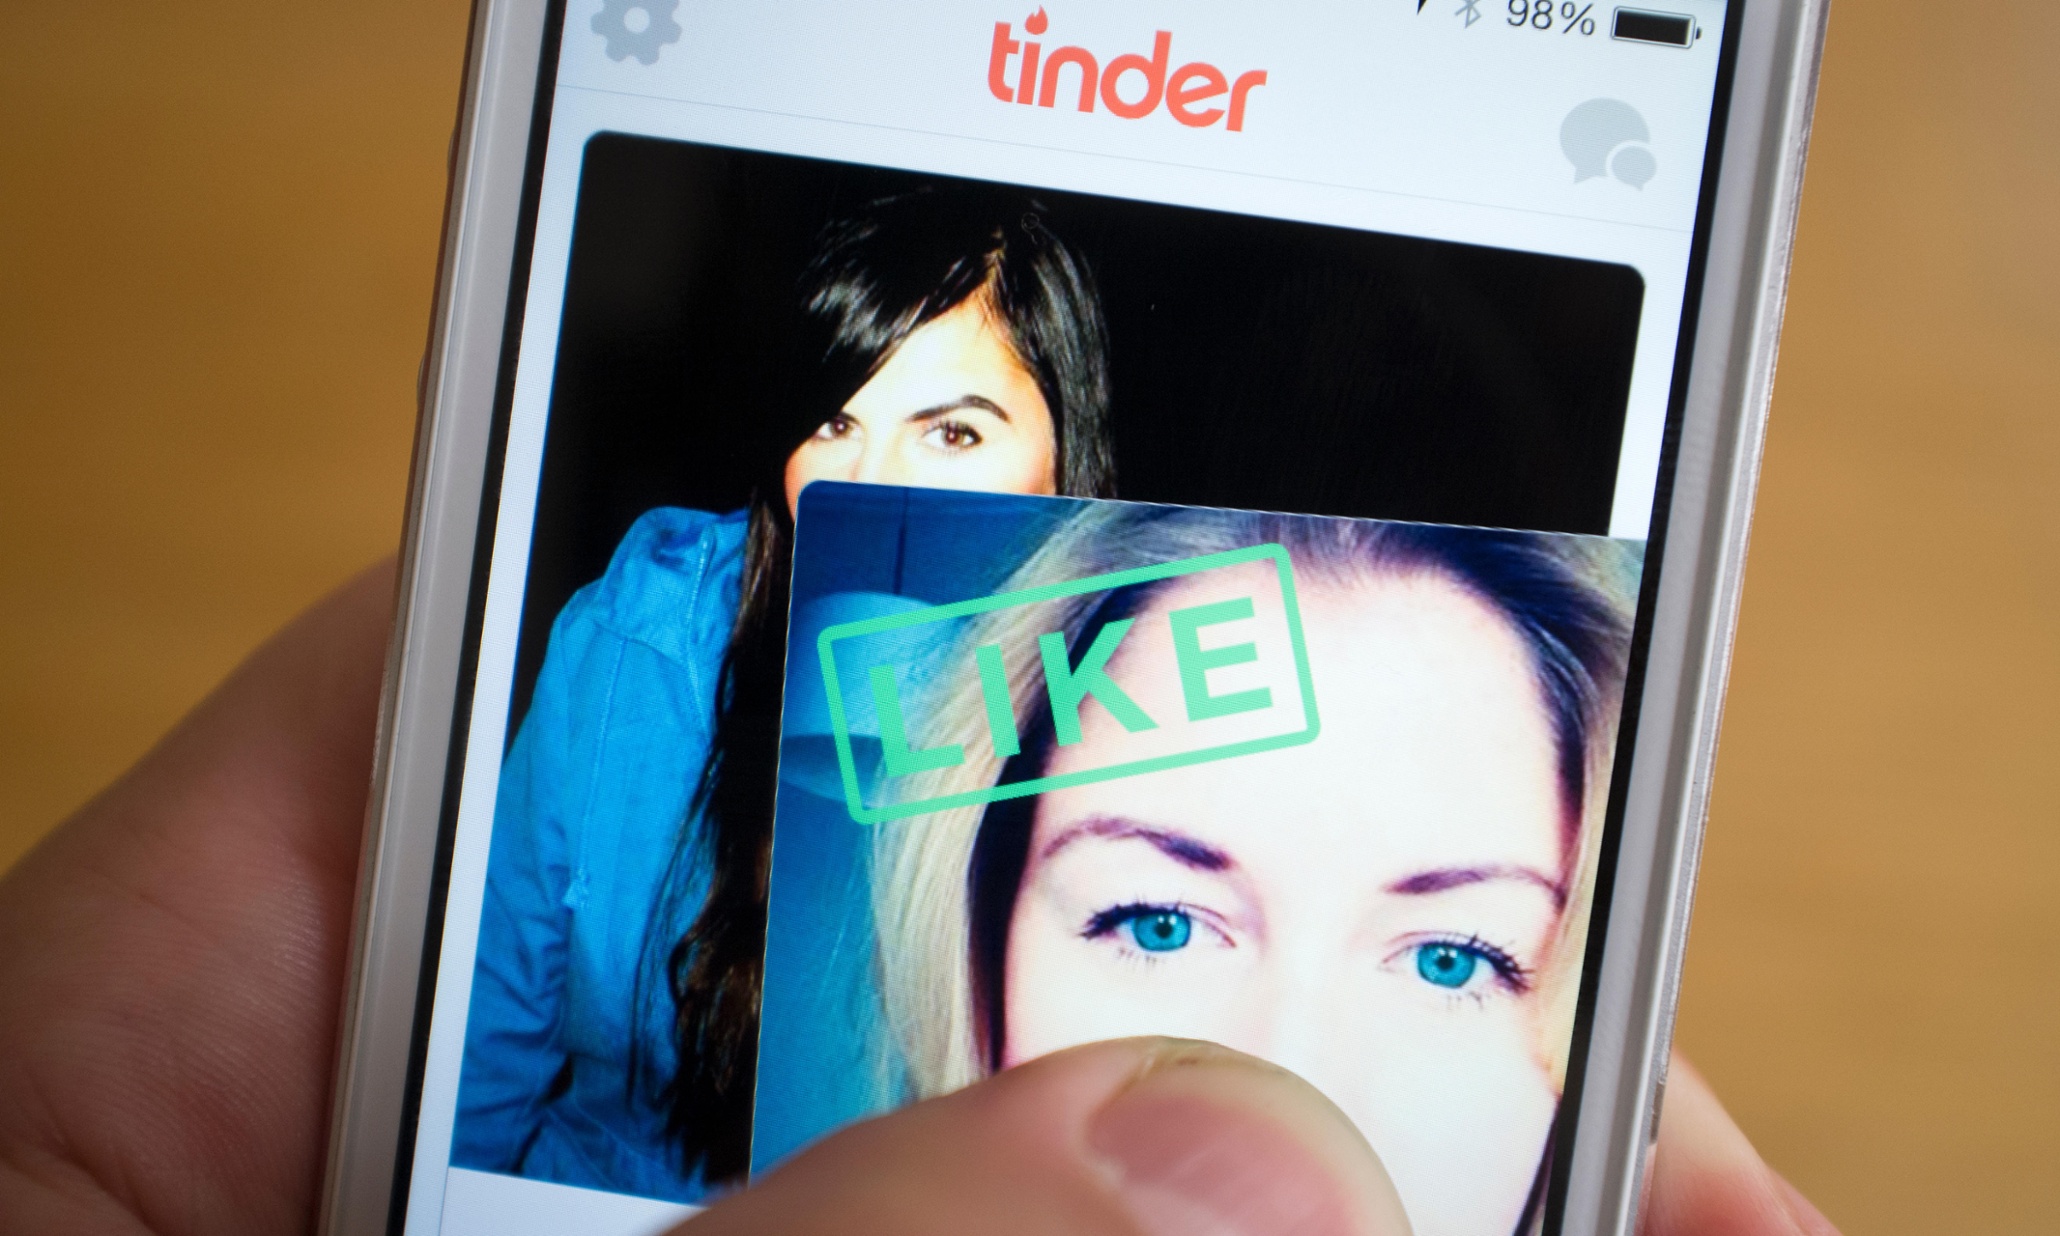 42 Of People Using Dating App Tinder Already Have A Partner Claims 0933